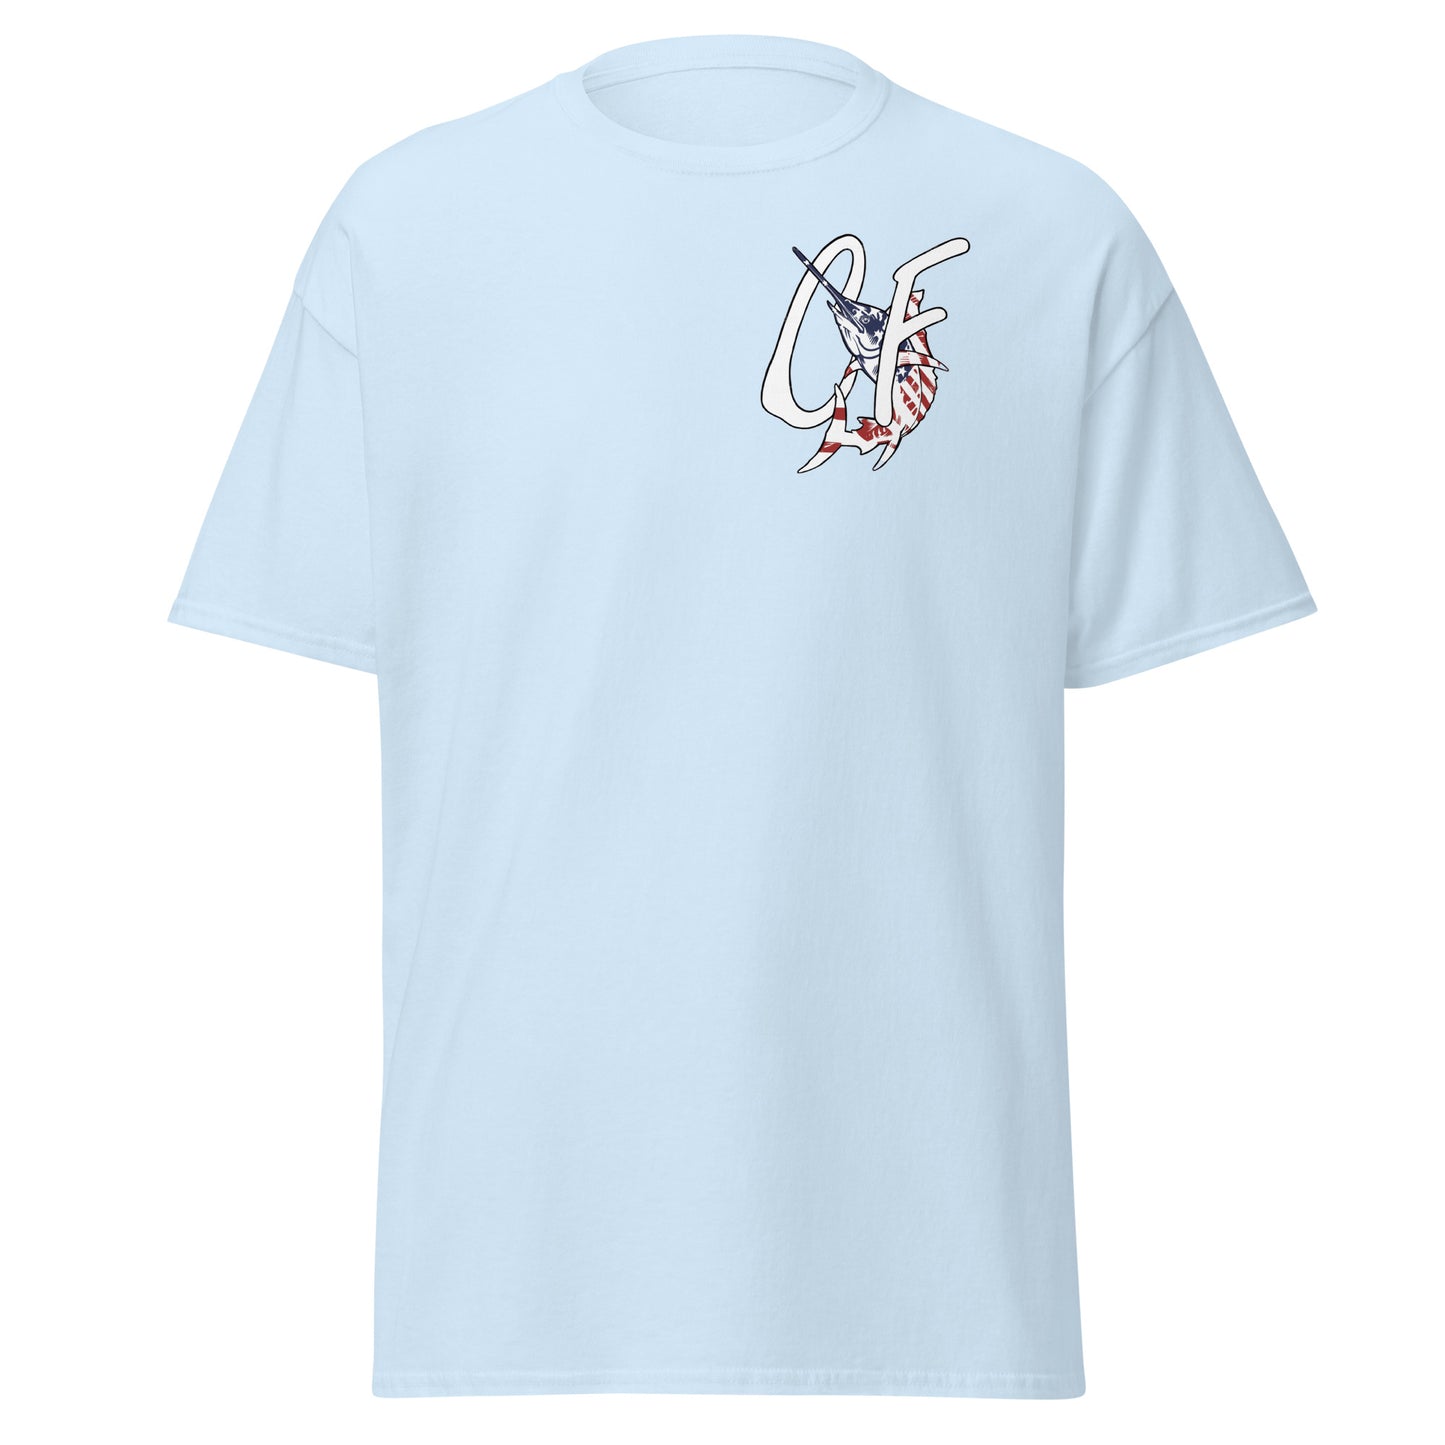 "Catch of the Day" Graphic T Shirt